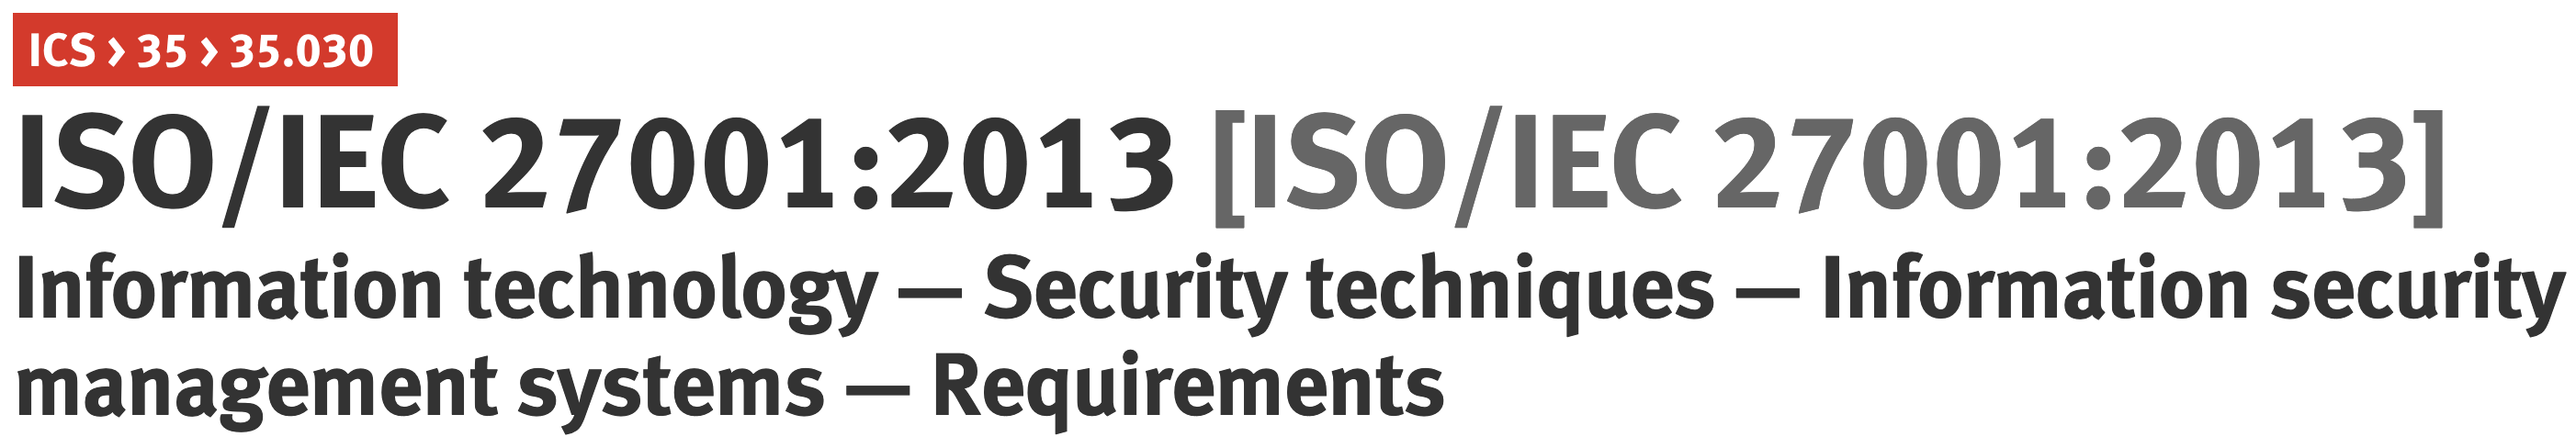 ISO 27001 consultant-ISO 27001 standard